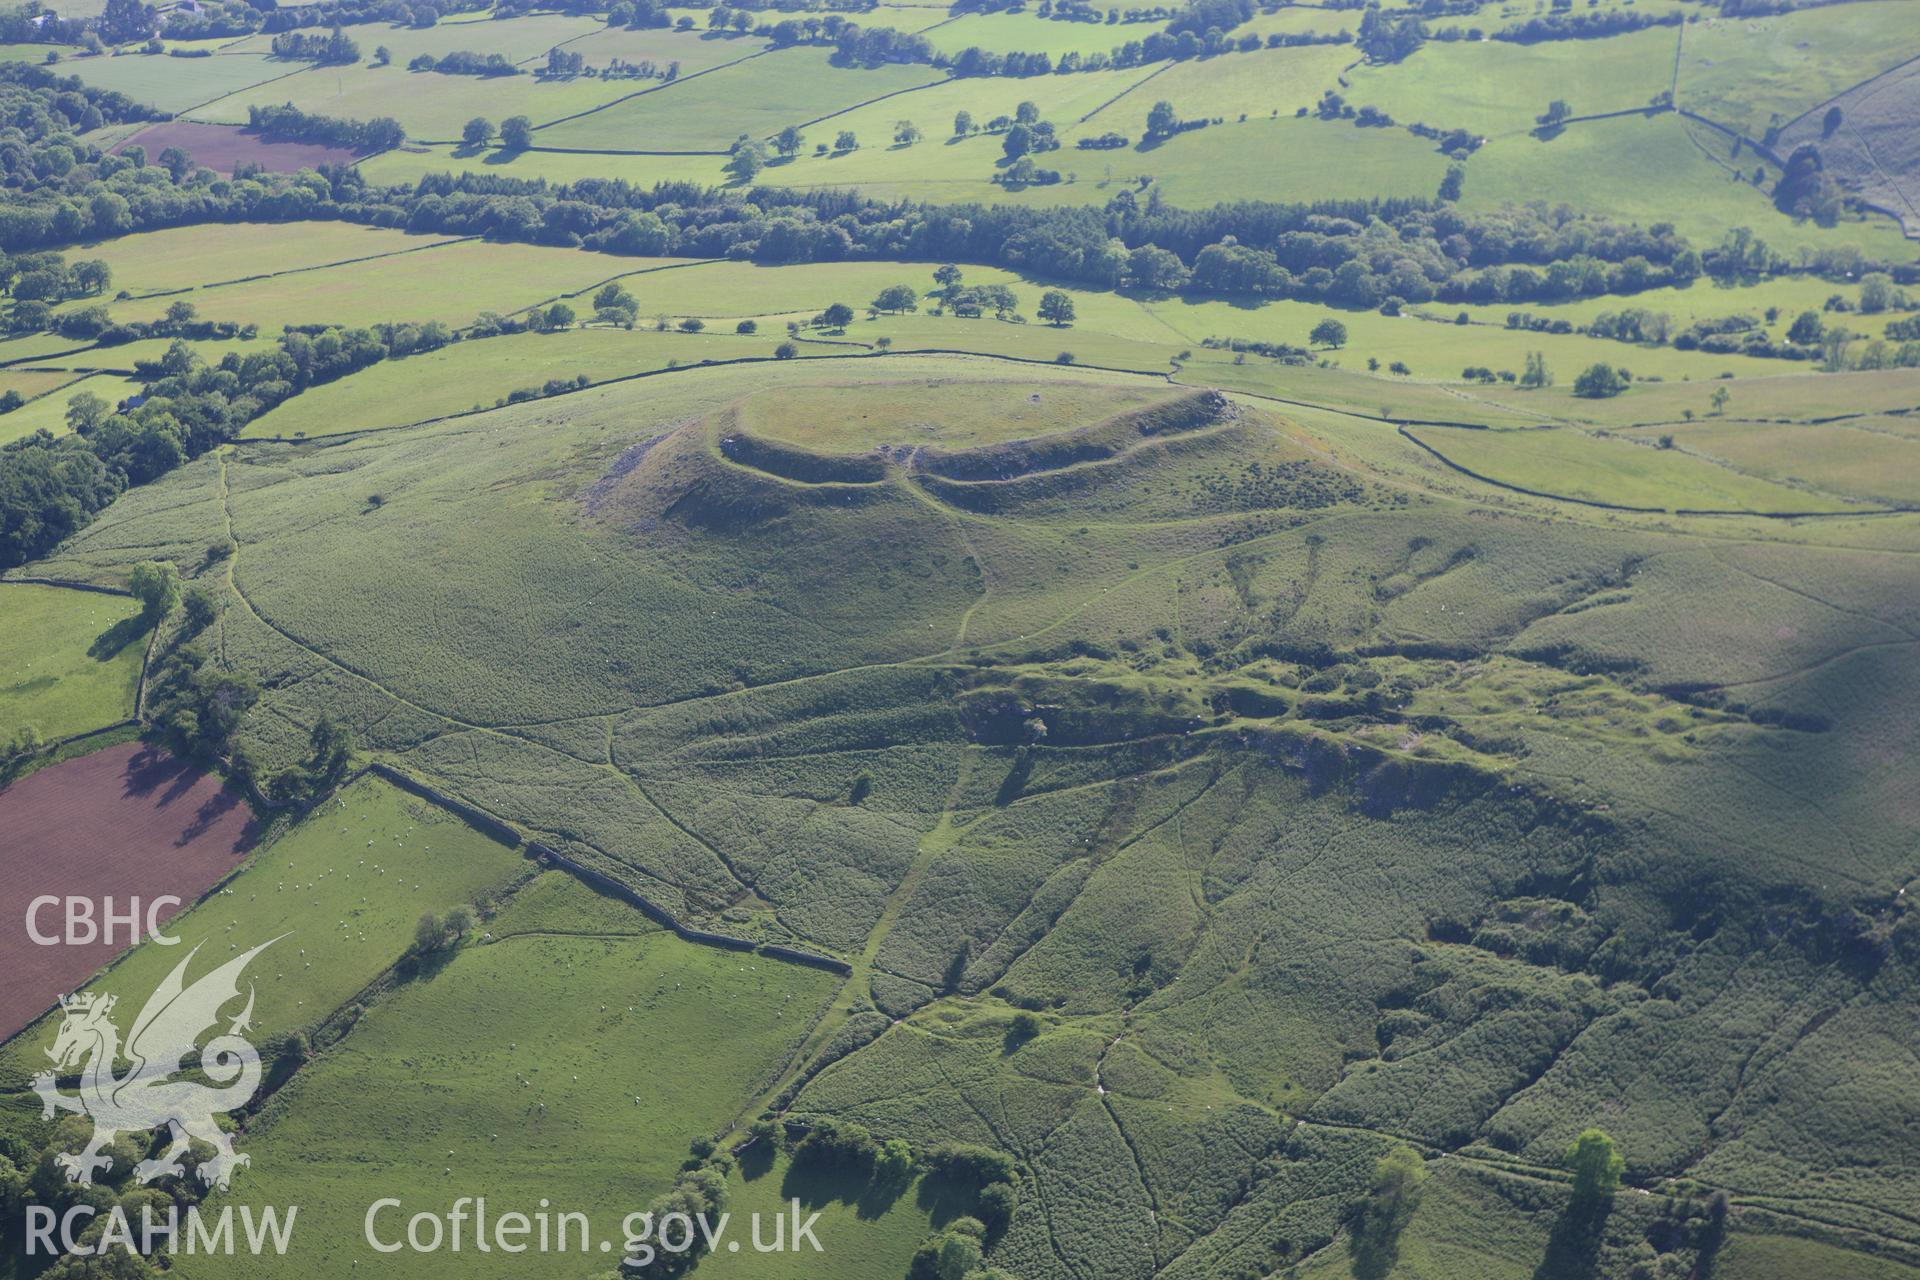 RCAHMW colour oblique aerial photograph of Crug Hywel Camp. Taken on 11 June 2009 by Toby Driver